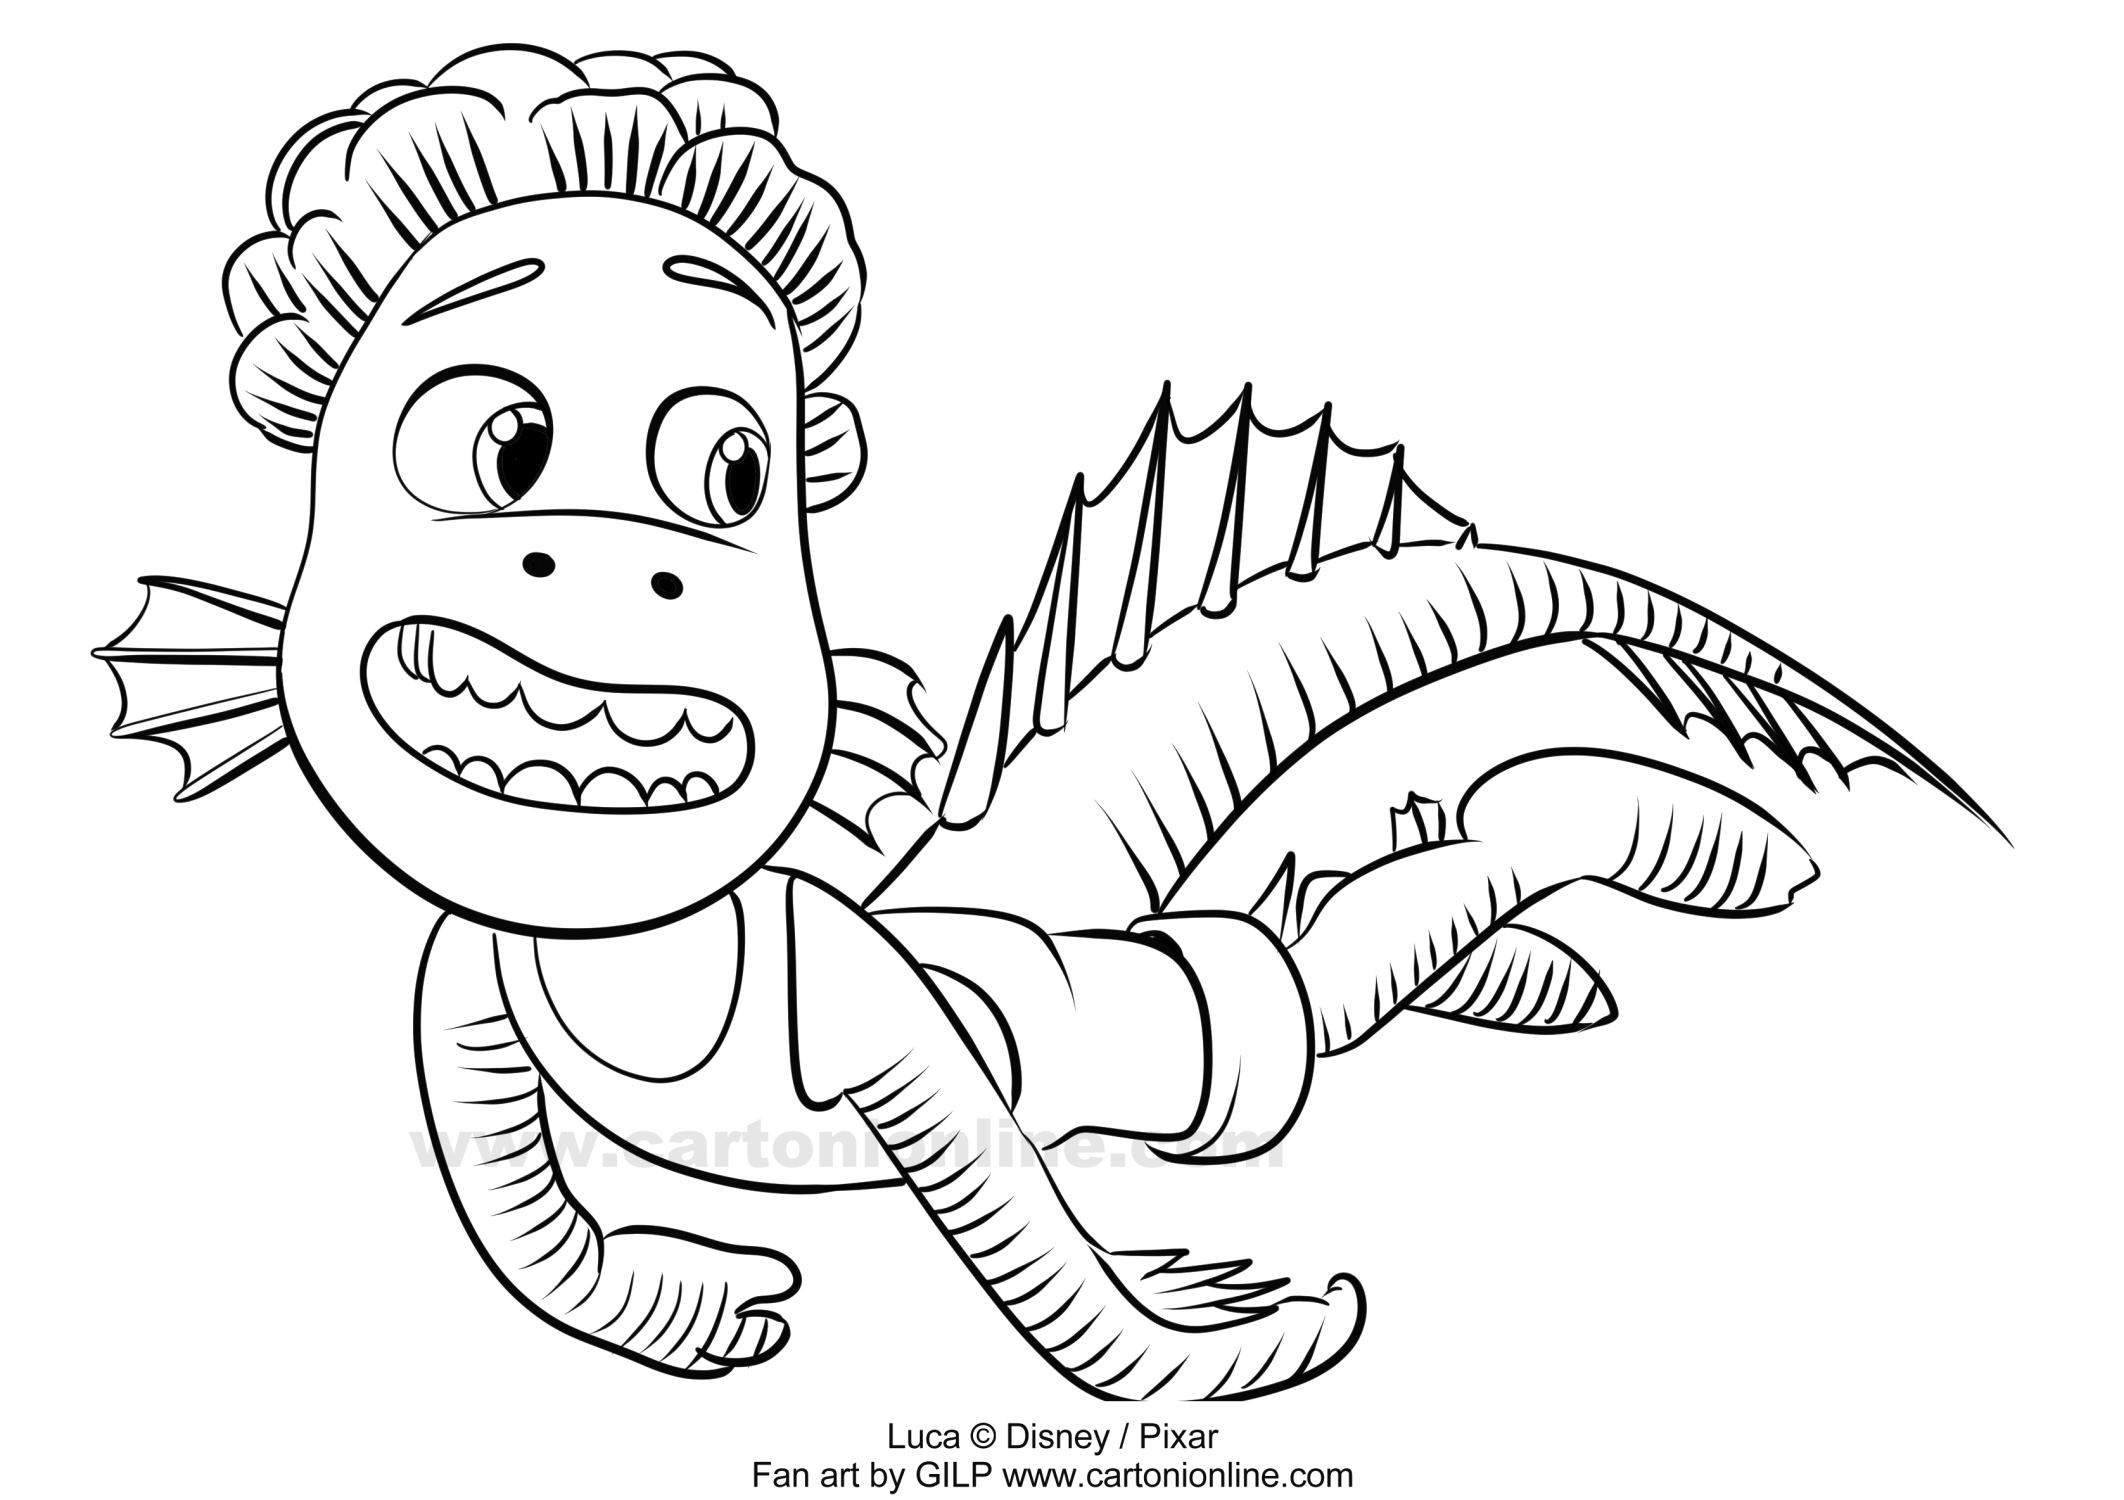 Alberto Scorfano from Luca (Disney/Pixar) coloring page to print and coloring